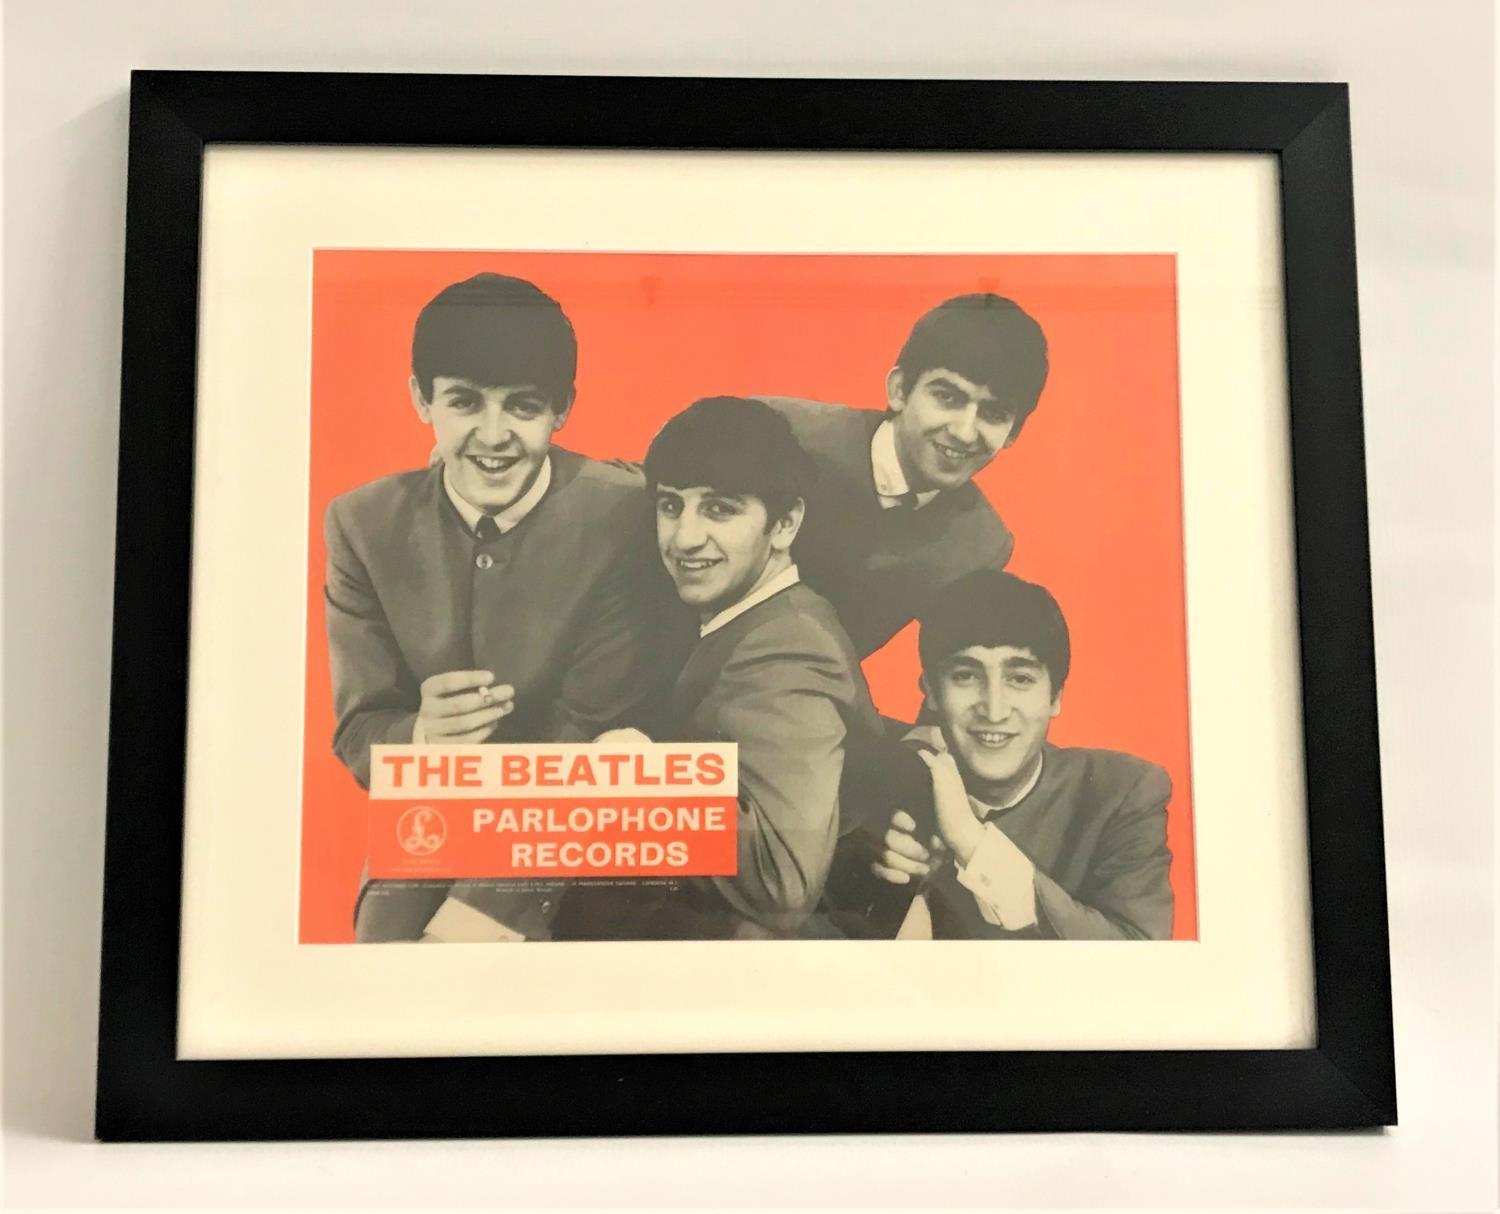 THE BEATLES PARLOPHONE RECORDS FRAMED PRINT the four band members against a bright orange